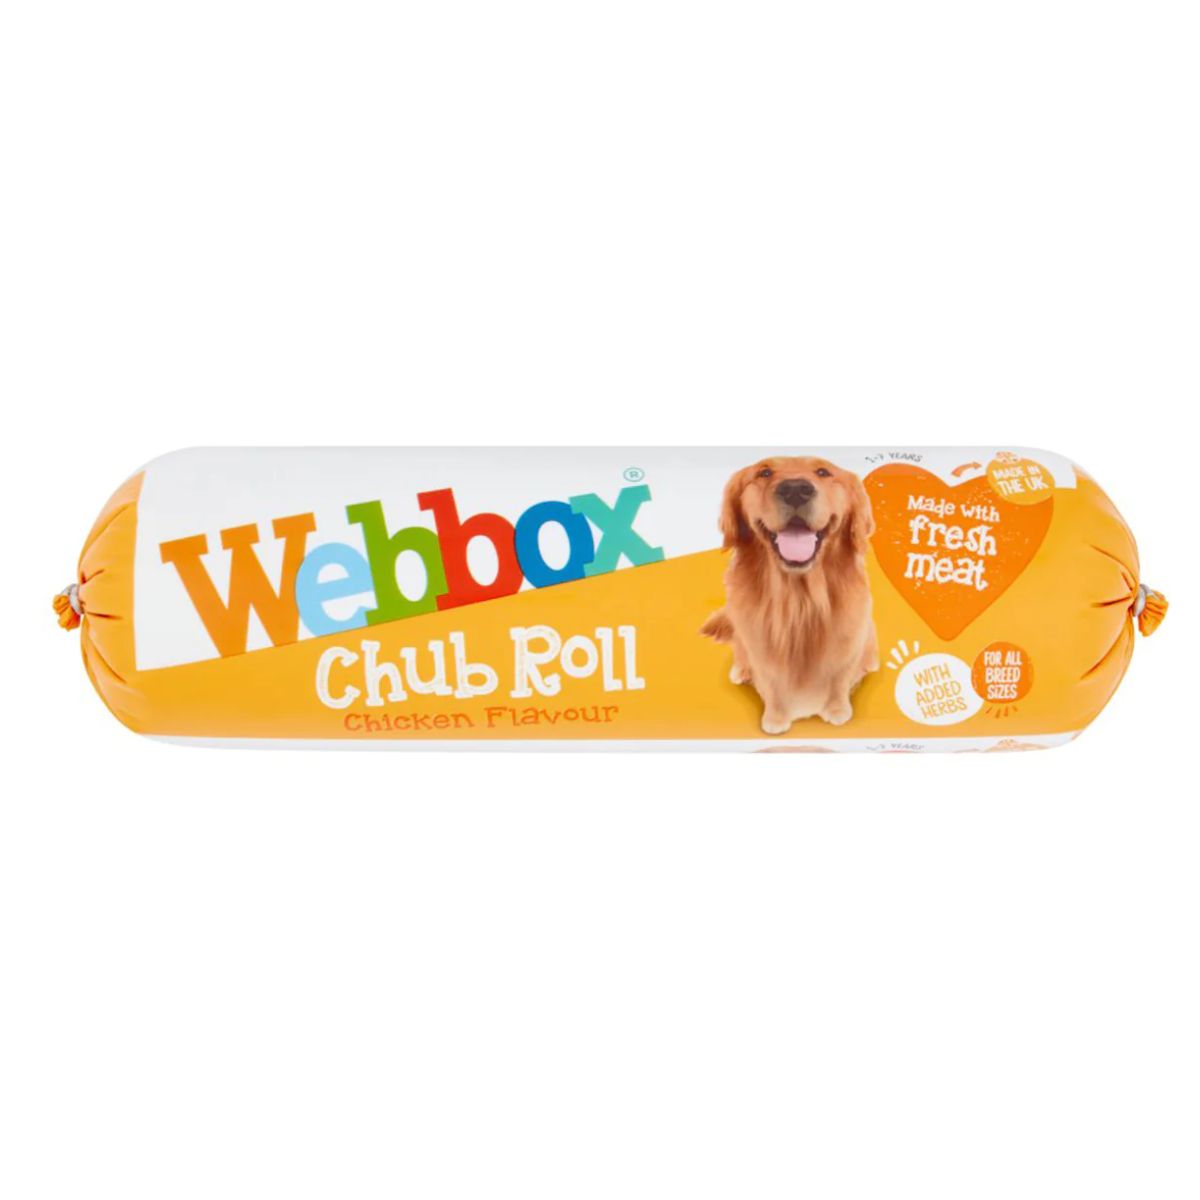 A packaged Webbox - Chub Roll Chicken Flavour (720g), featuring an image of a dog on the label.